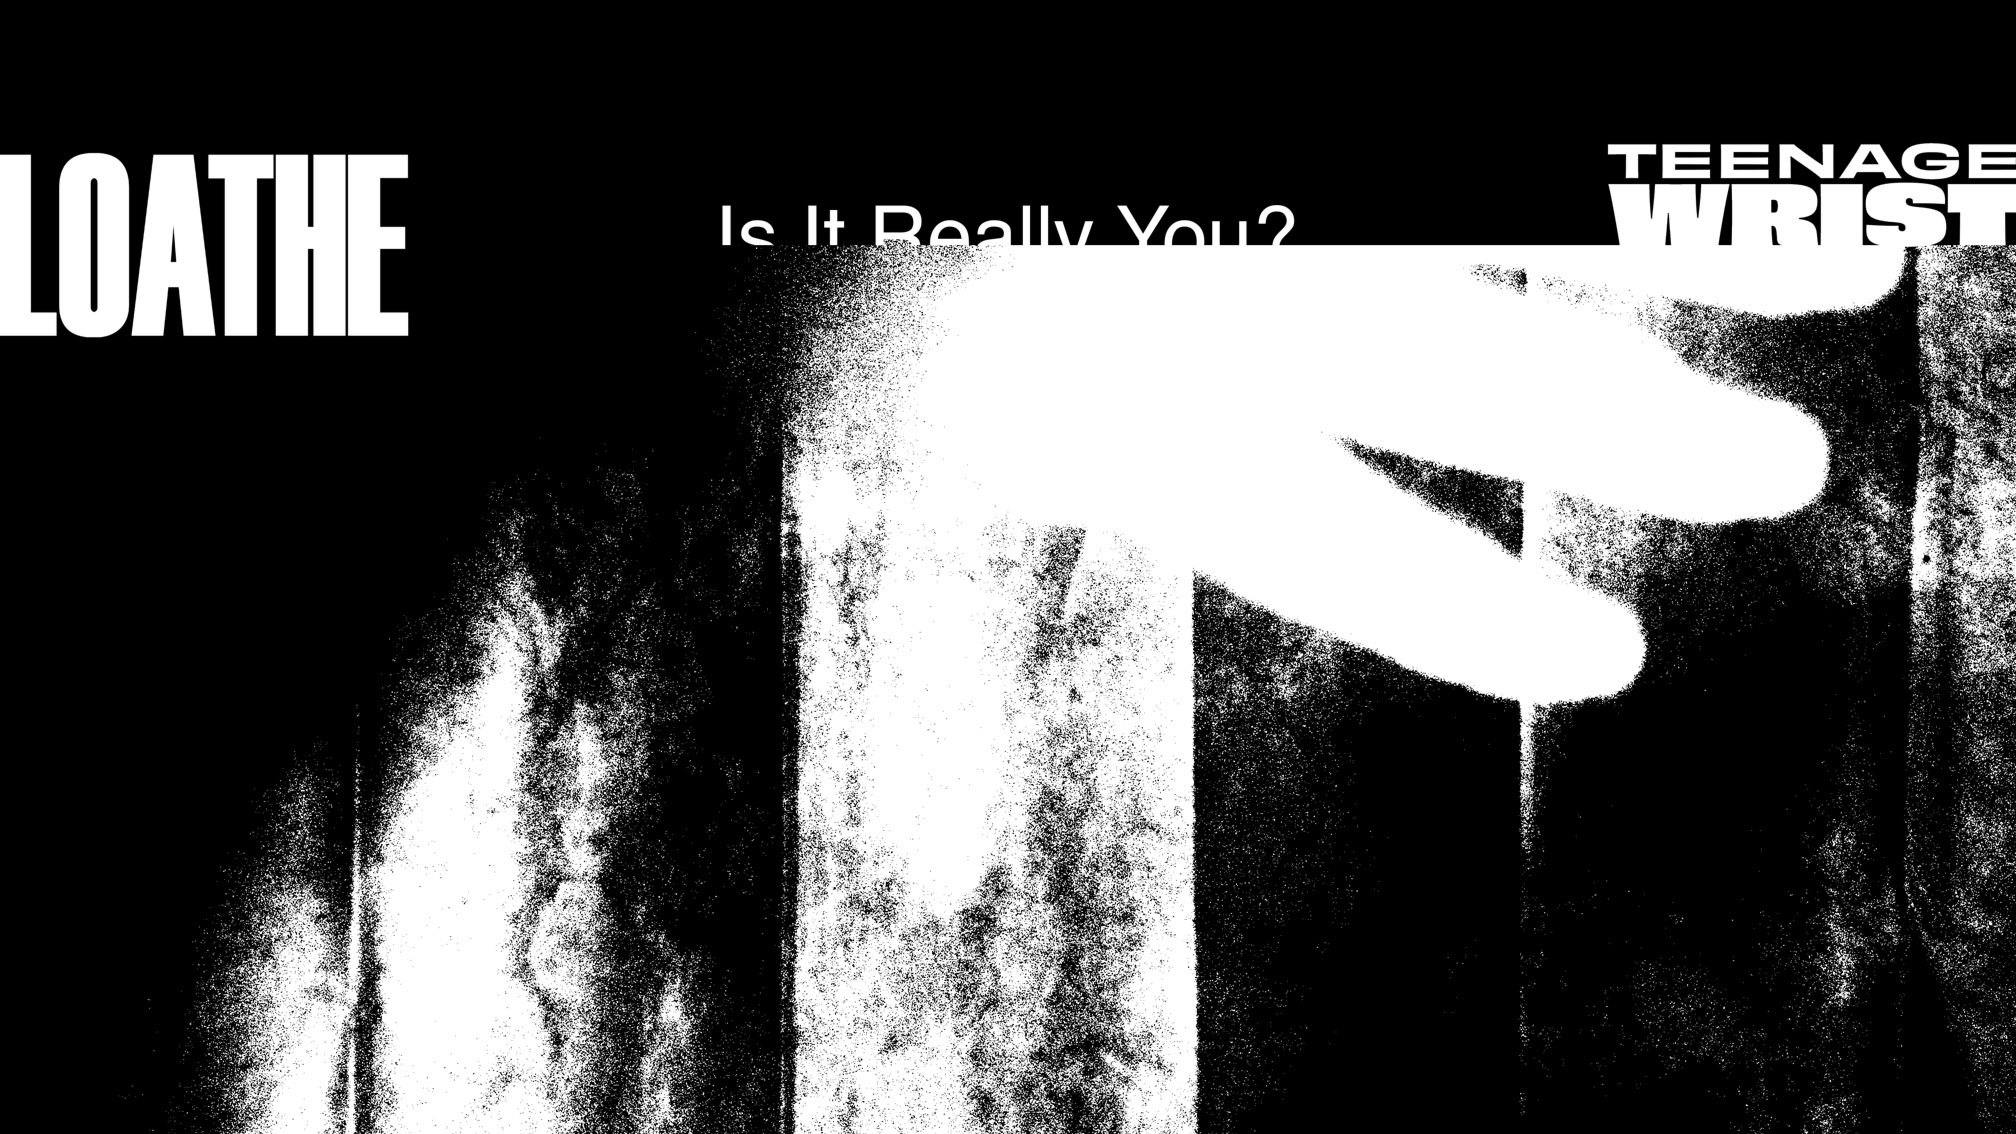 Listen: Loathe and Teenage Wrist collab on new version of Is It Really You?